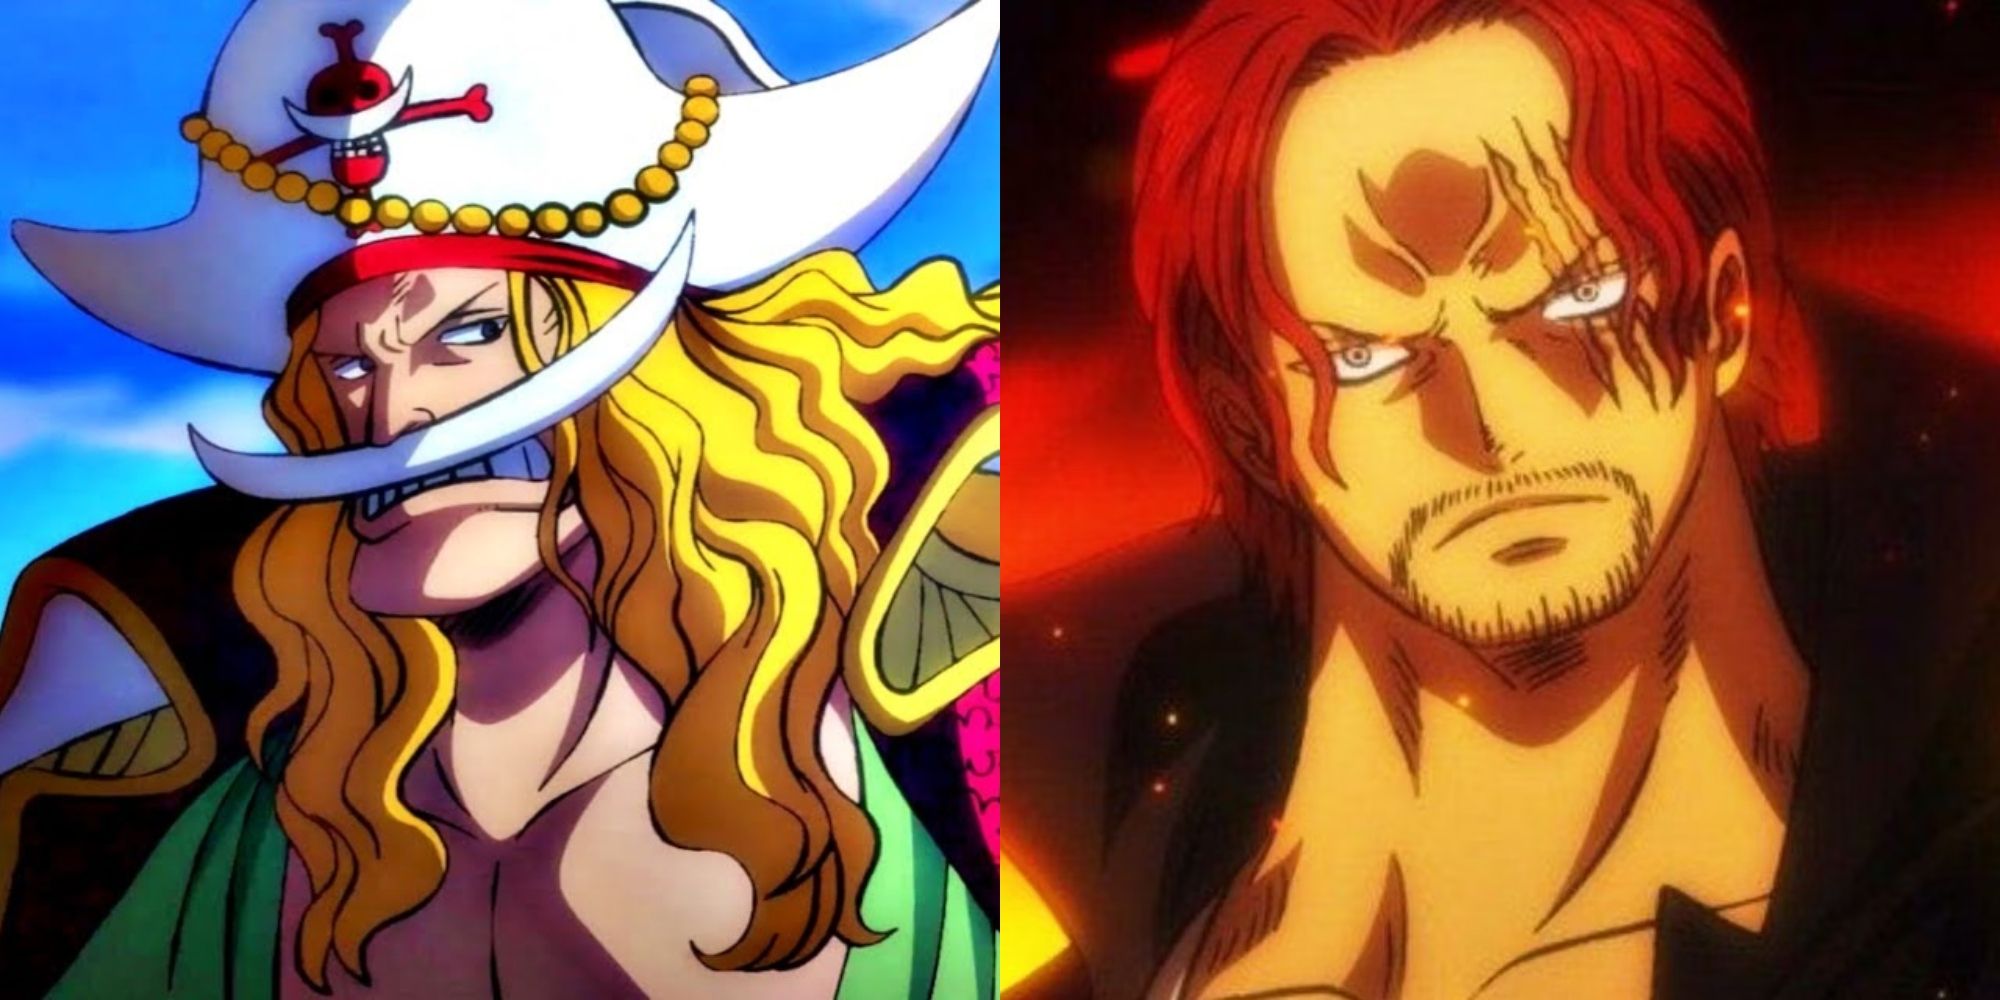 THE NEW EMPERORS OF THE SEA 🔥 #anime #onepiece #foryourpage #fyp #wan